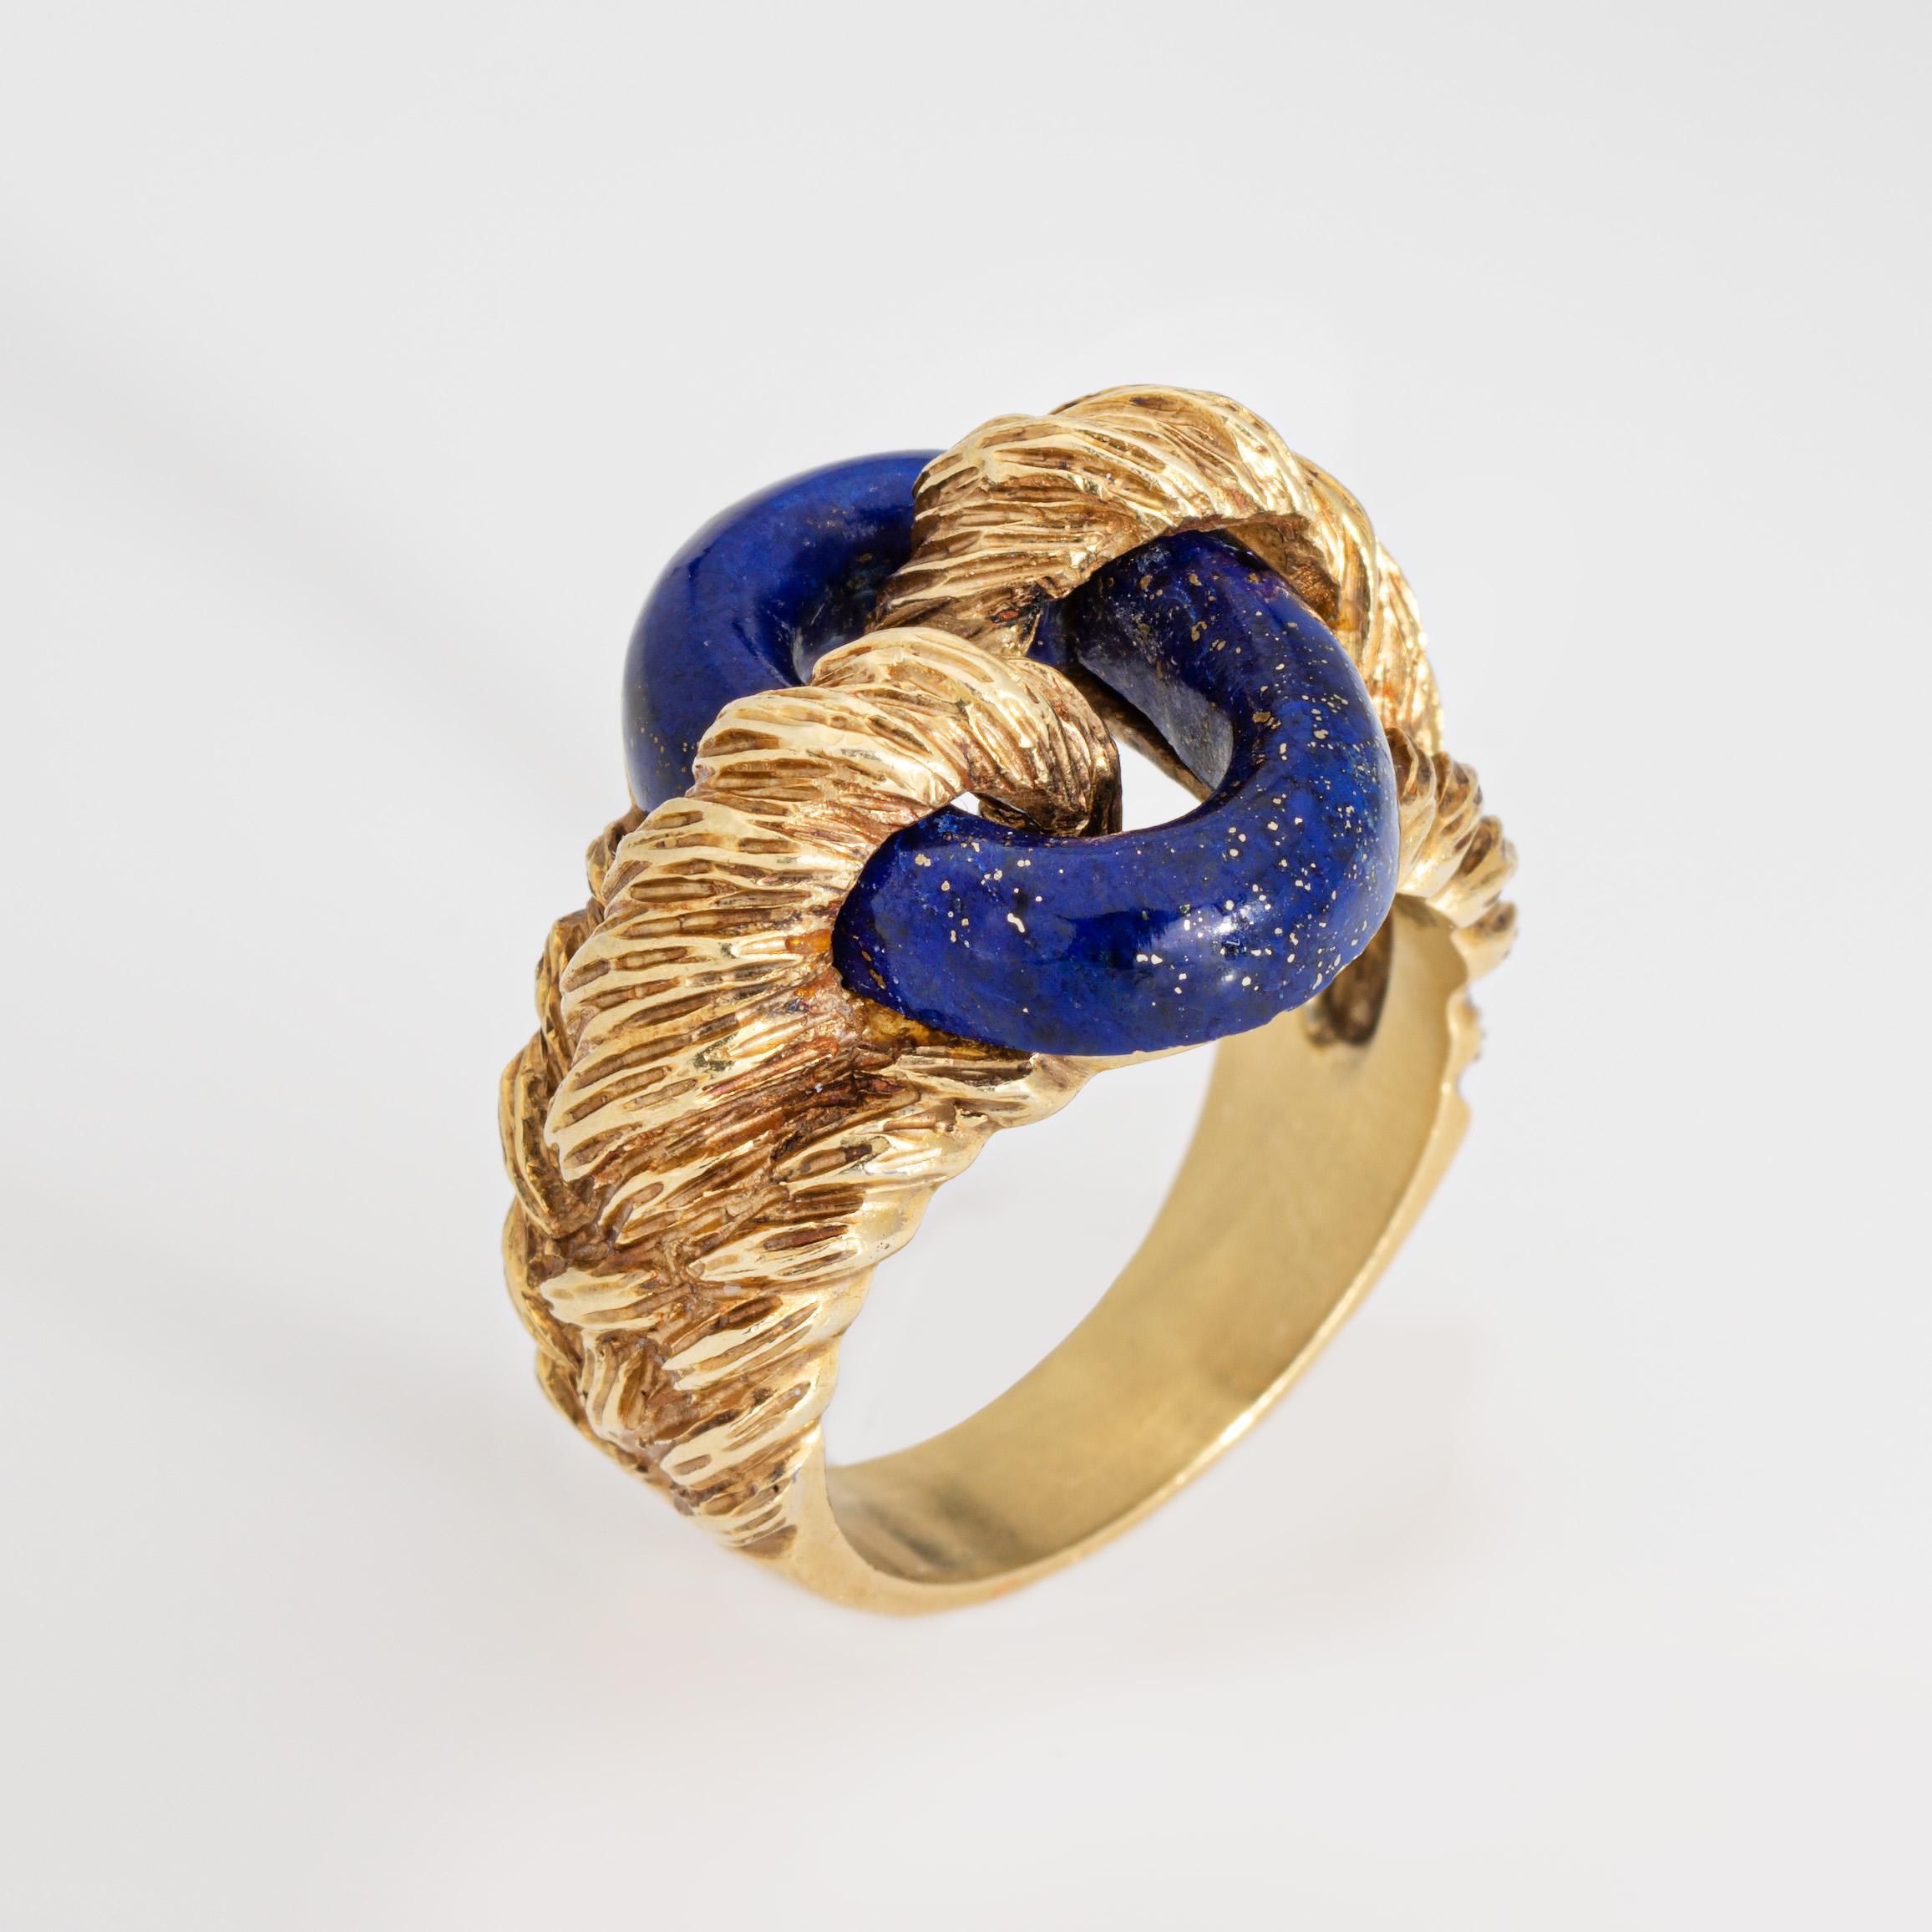 Stylish and finely detailed lapis lazuli ring crafted in 18 karat yellow gold (circa 1970s).

Oval cut lapis lazuli measures 5mm. The lapis is in very good condition and free of cracks or chips. 

Cobalt blue lapis lazuli is oval cut, supported in